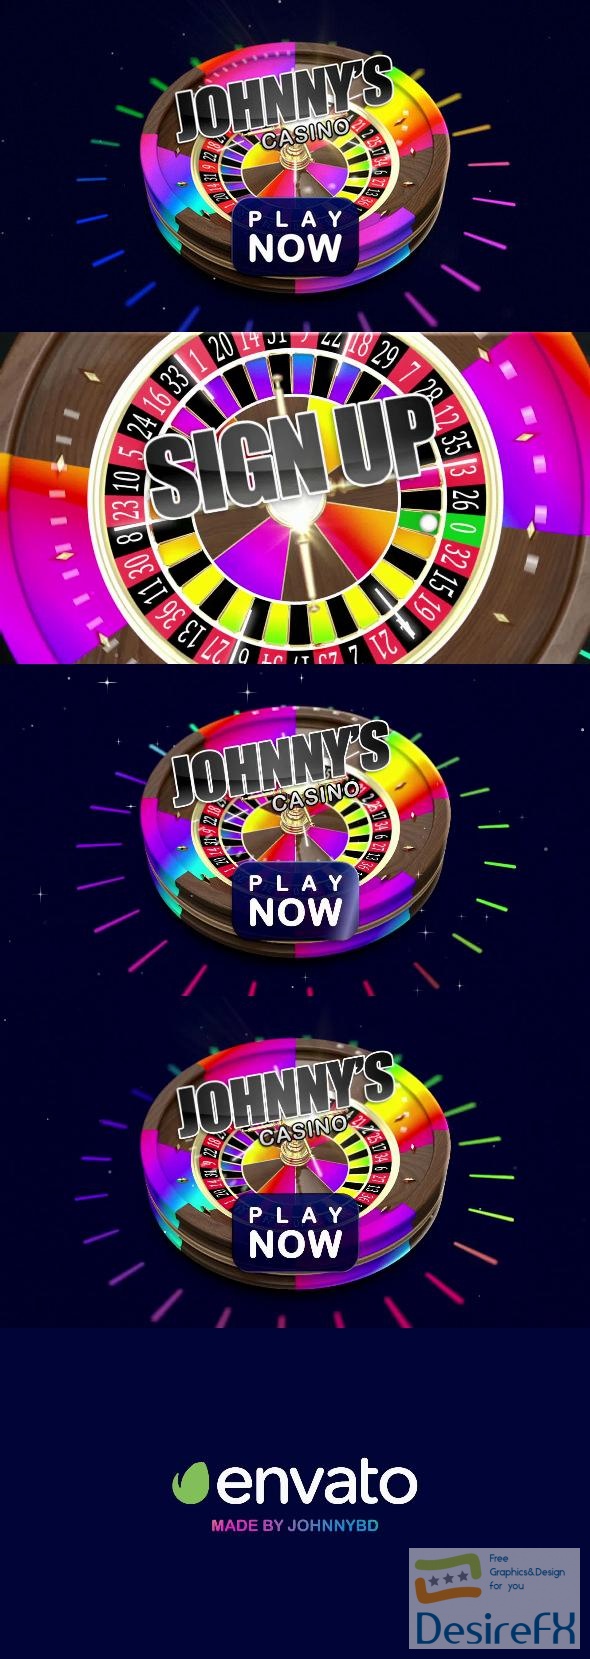 VideoHive Johnnys Casino - Diversity and inclusion 36864725